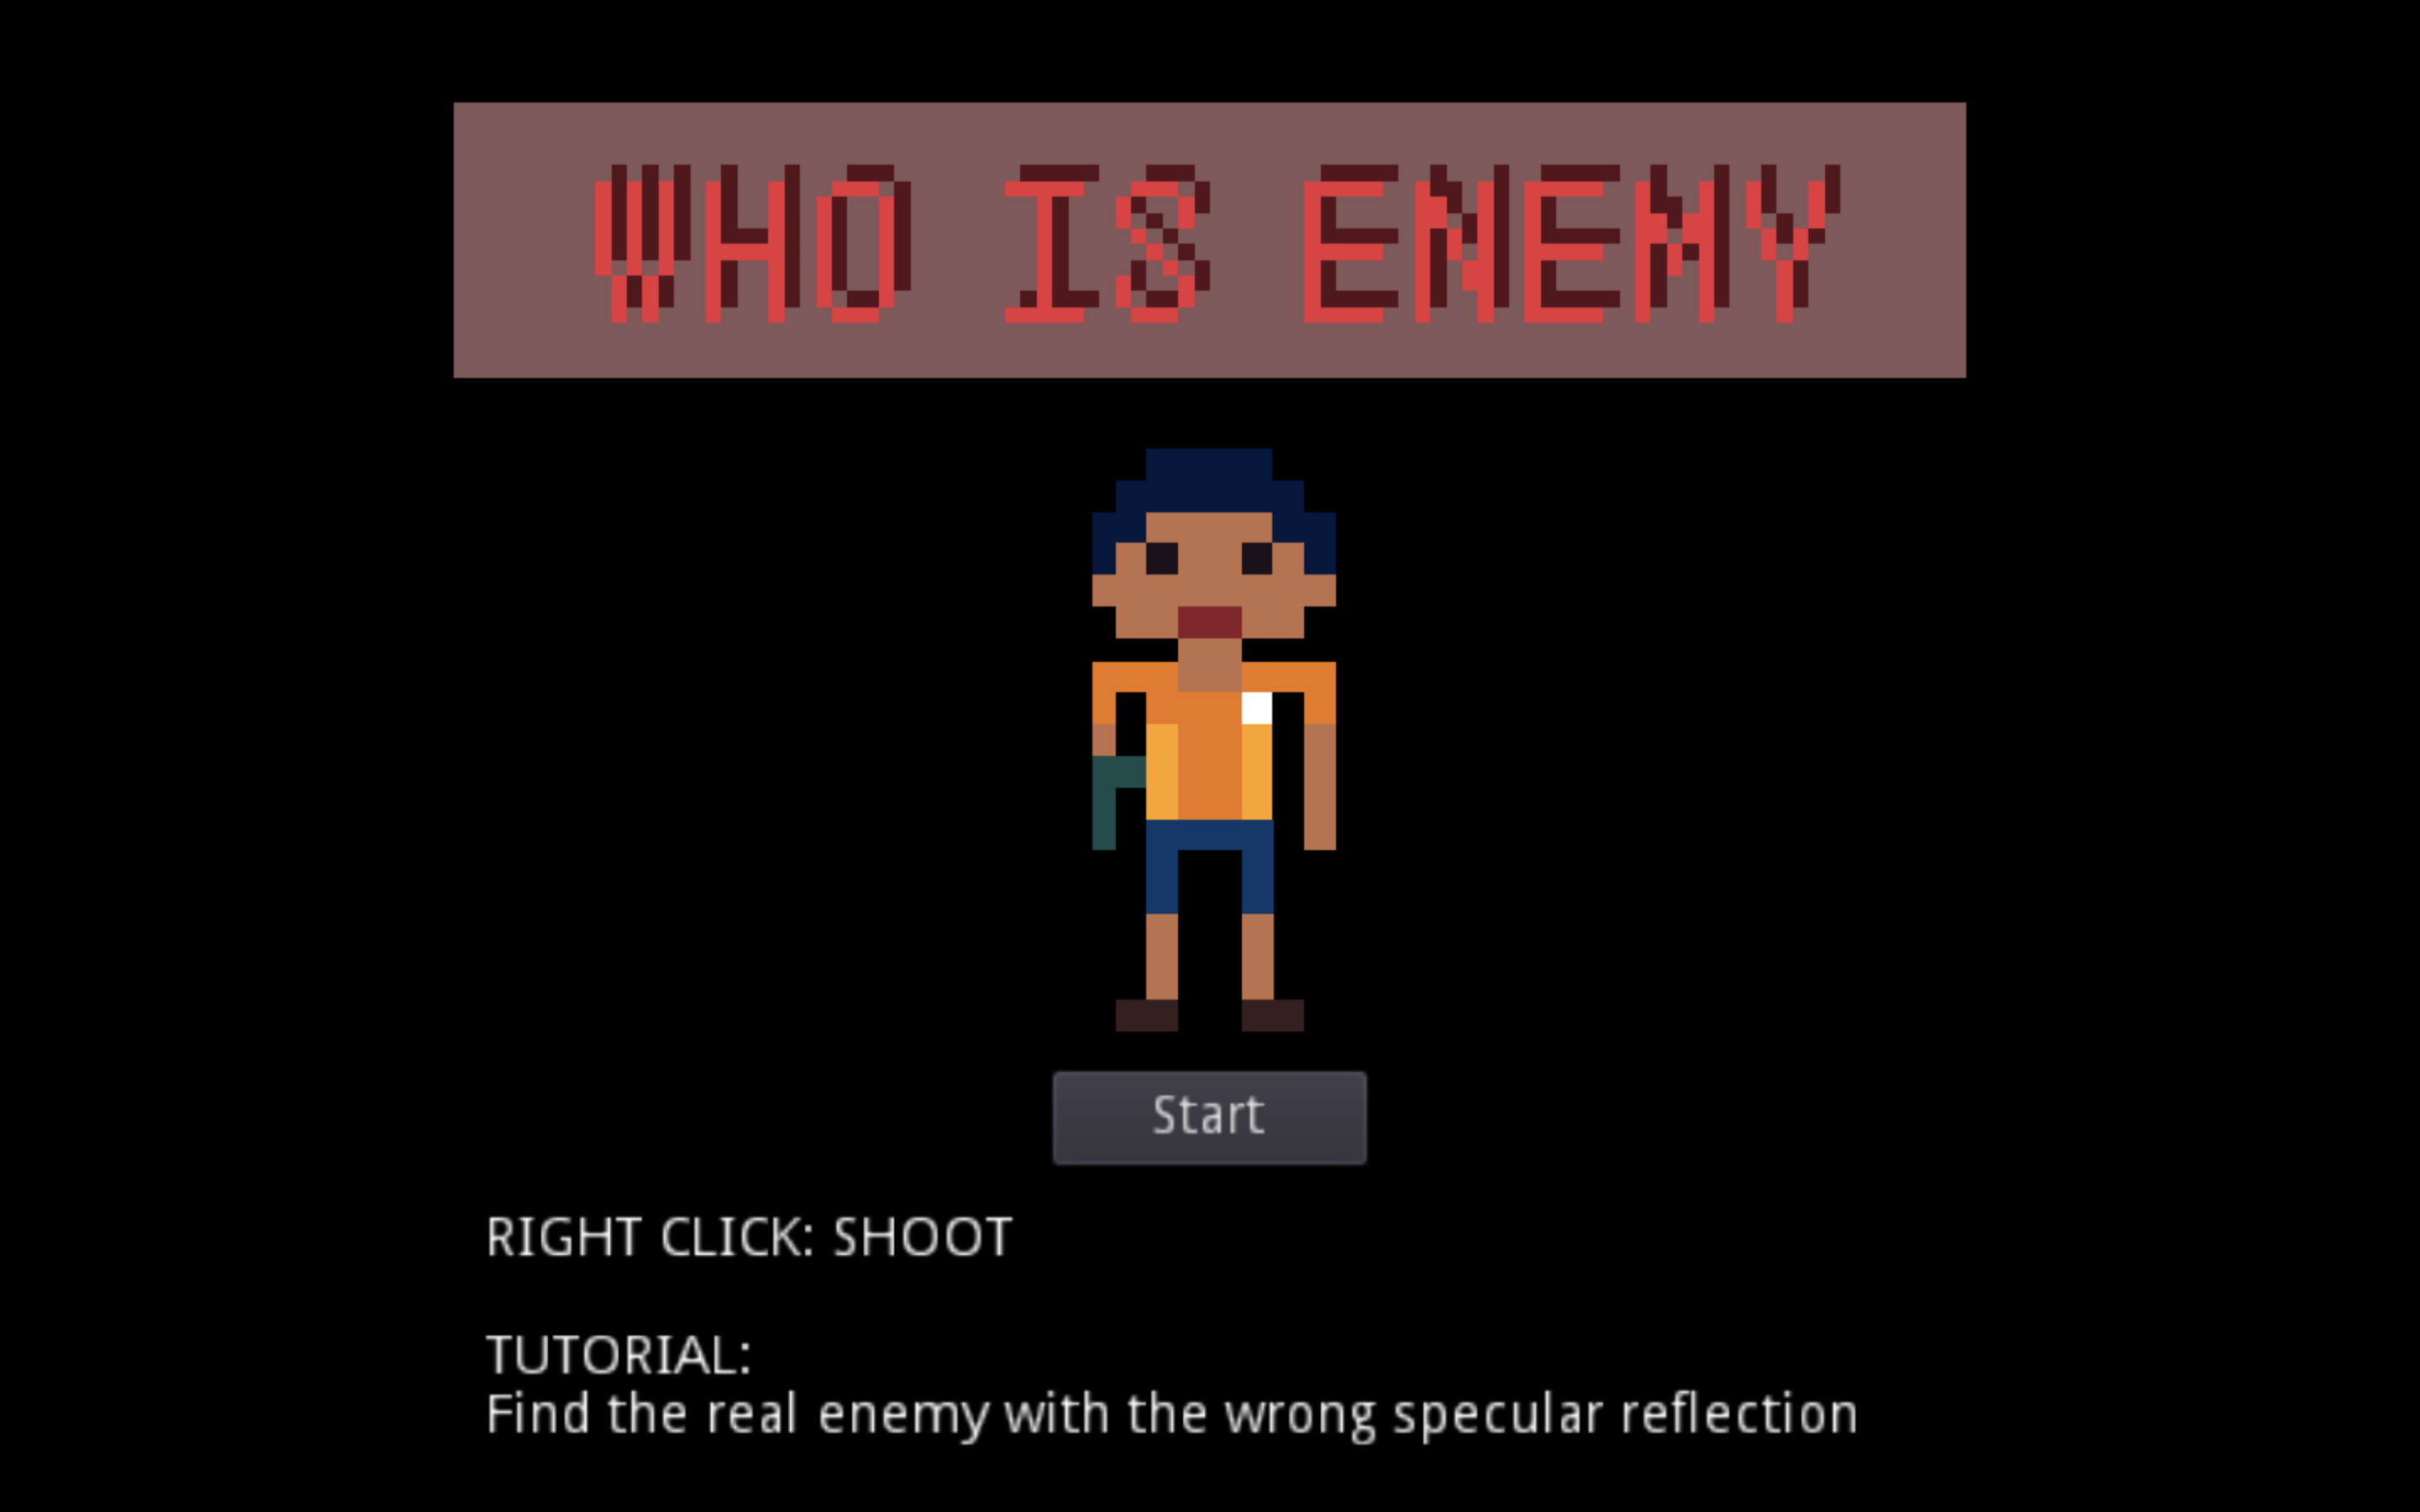 WHO IS ENEMY